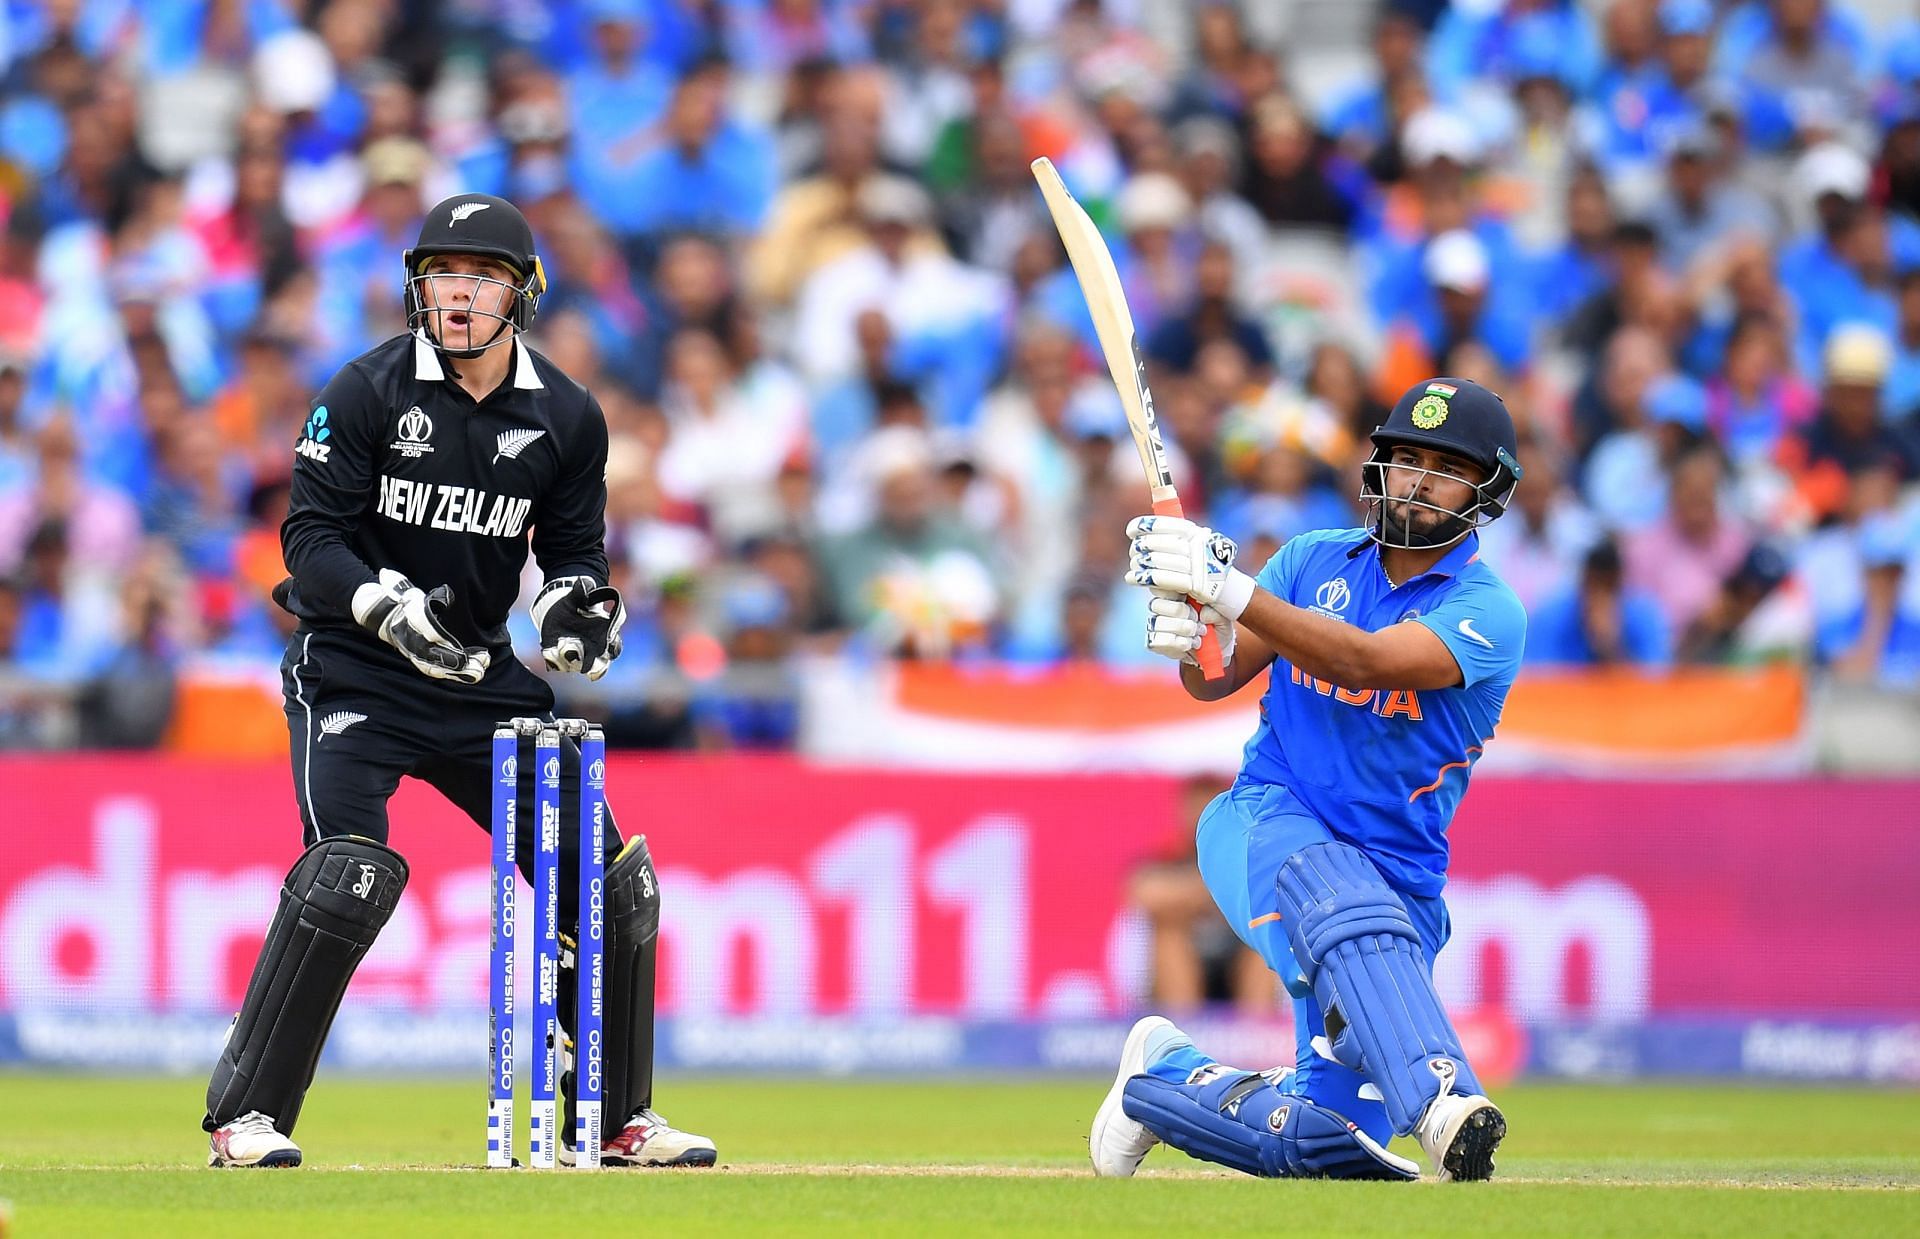 Rishabh Pant was among the three keepers in the Indian squad for the 2019 World Cup. Pic: Getty Images